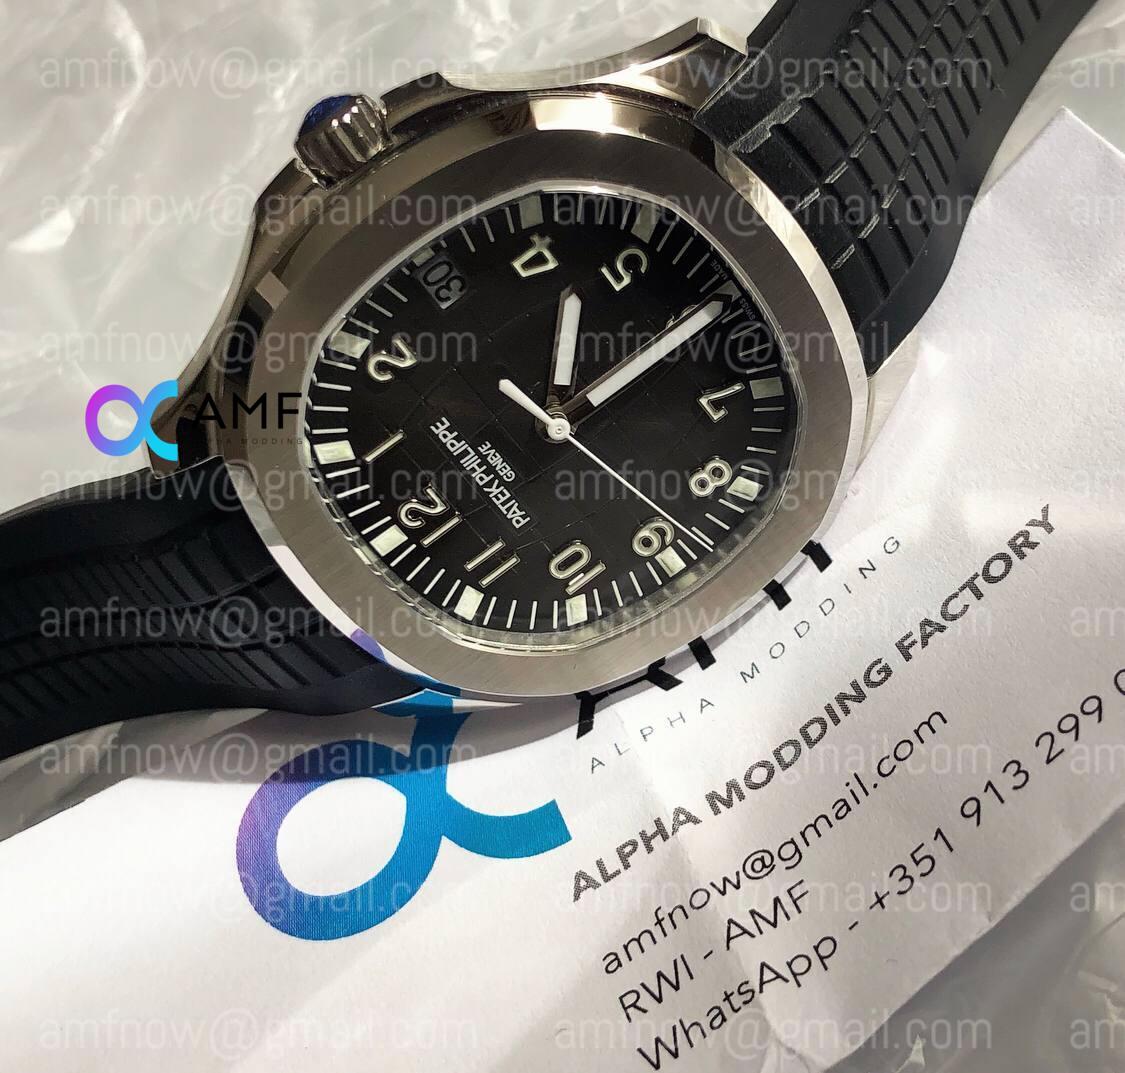 Jimin's Jewelry Archive 🌒 on X: Live on WeVerse [230901] • Patek Philippe  Aquanaut 5167/1A watch with stainless steel case, self-winding mechanical  movement and steel bracelet #JIMIN #JiminJewelryBox #박지민 #지민   